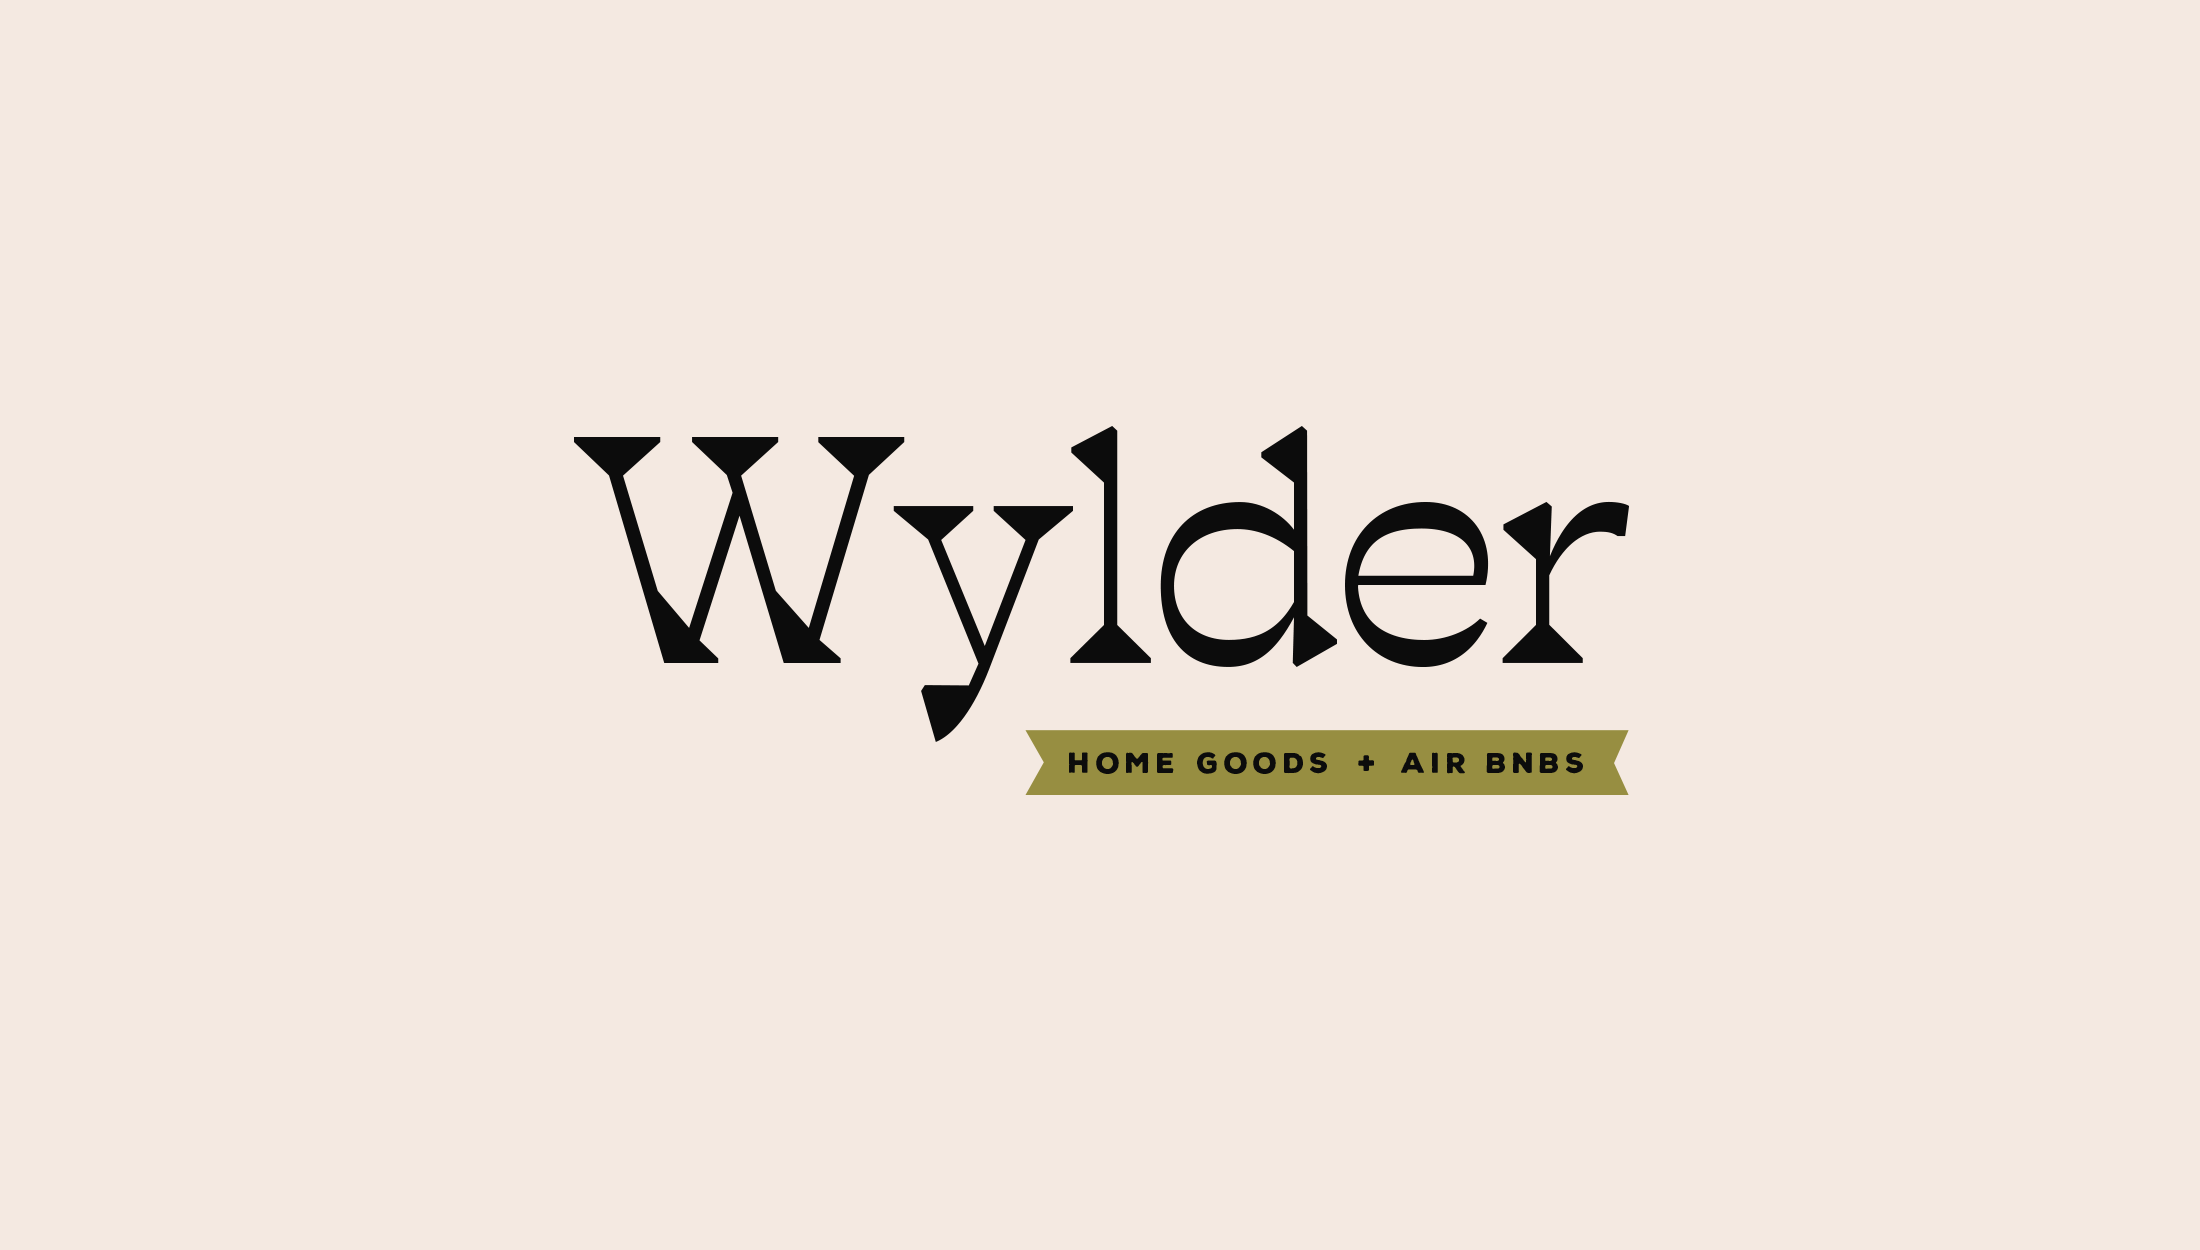 Logo design for Wylder, a home goods and AirBNB line steeped in family history - designed by Wiltshire-based graphic designer, Kaye Huett